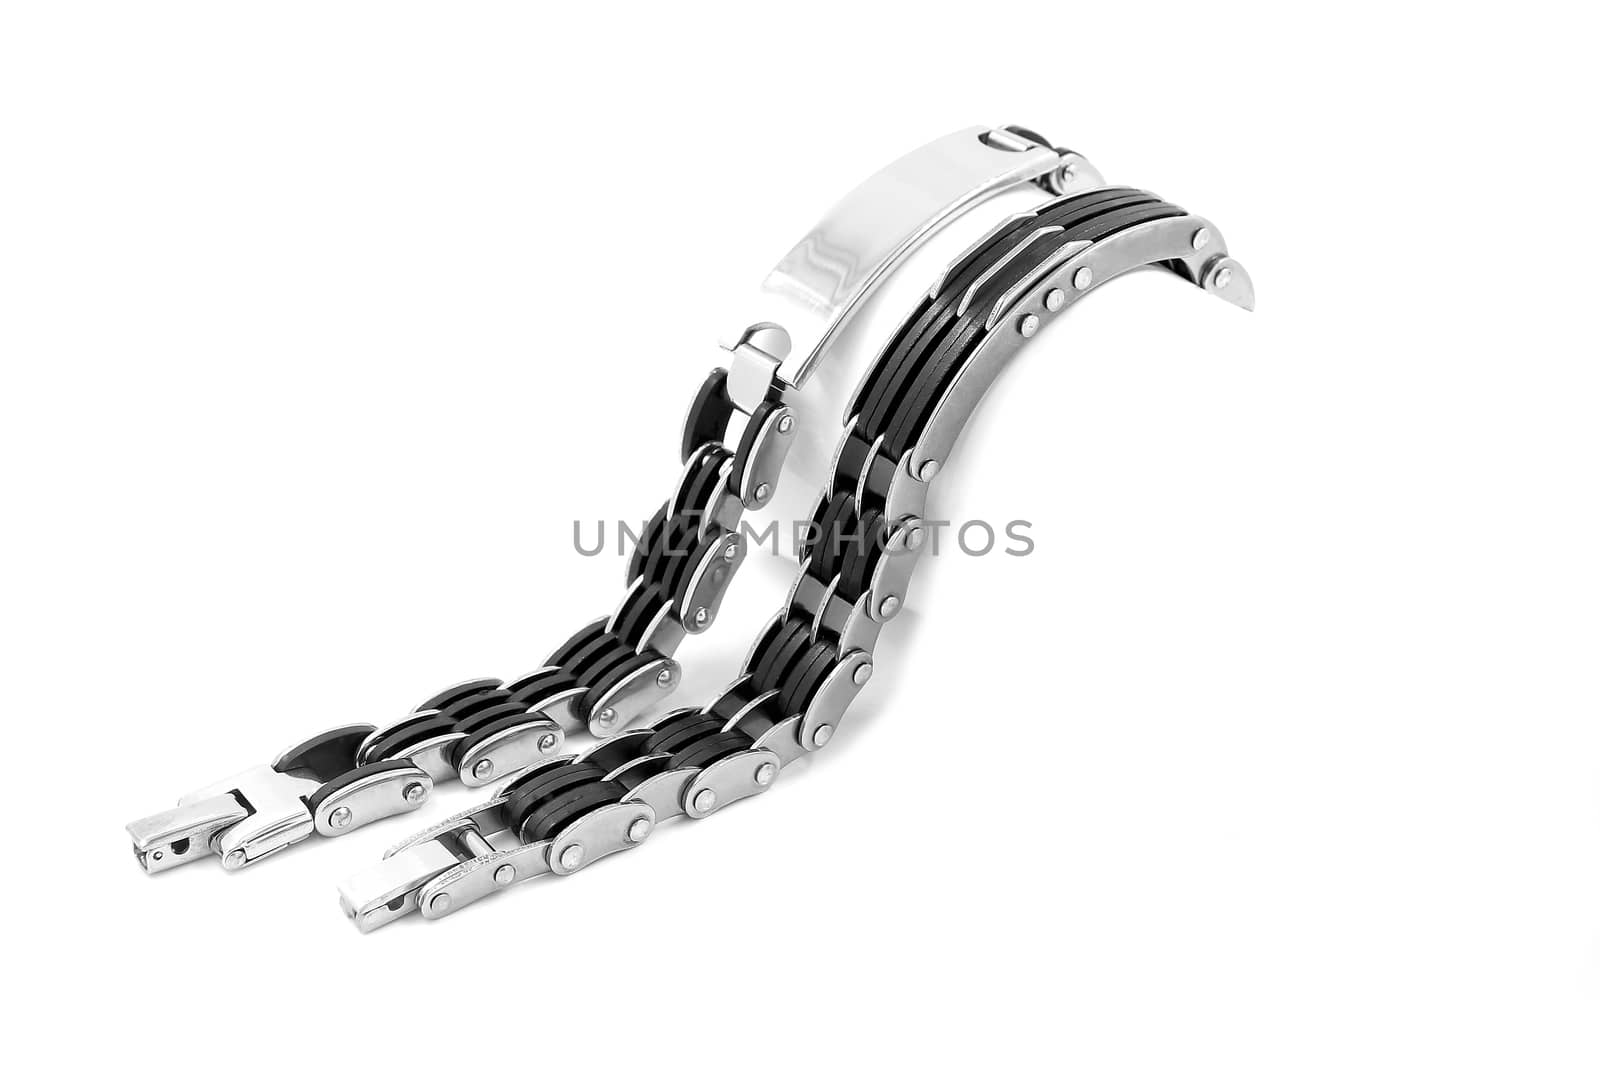 Bracelet, surgical stainless steel by Jandix